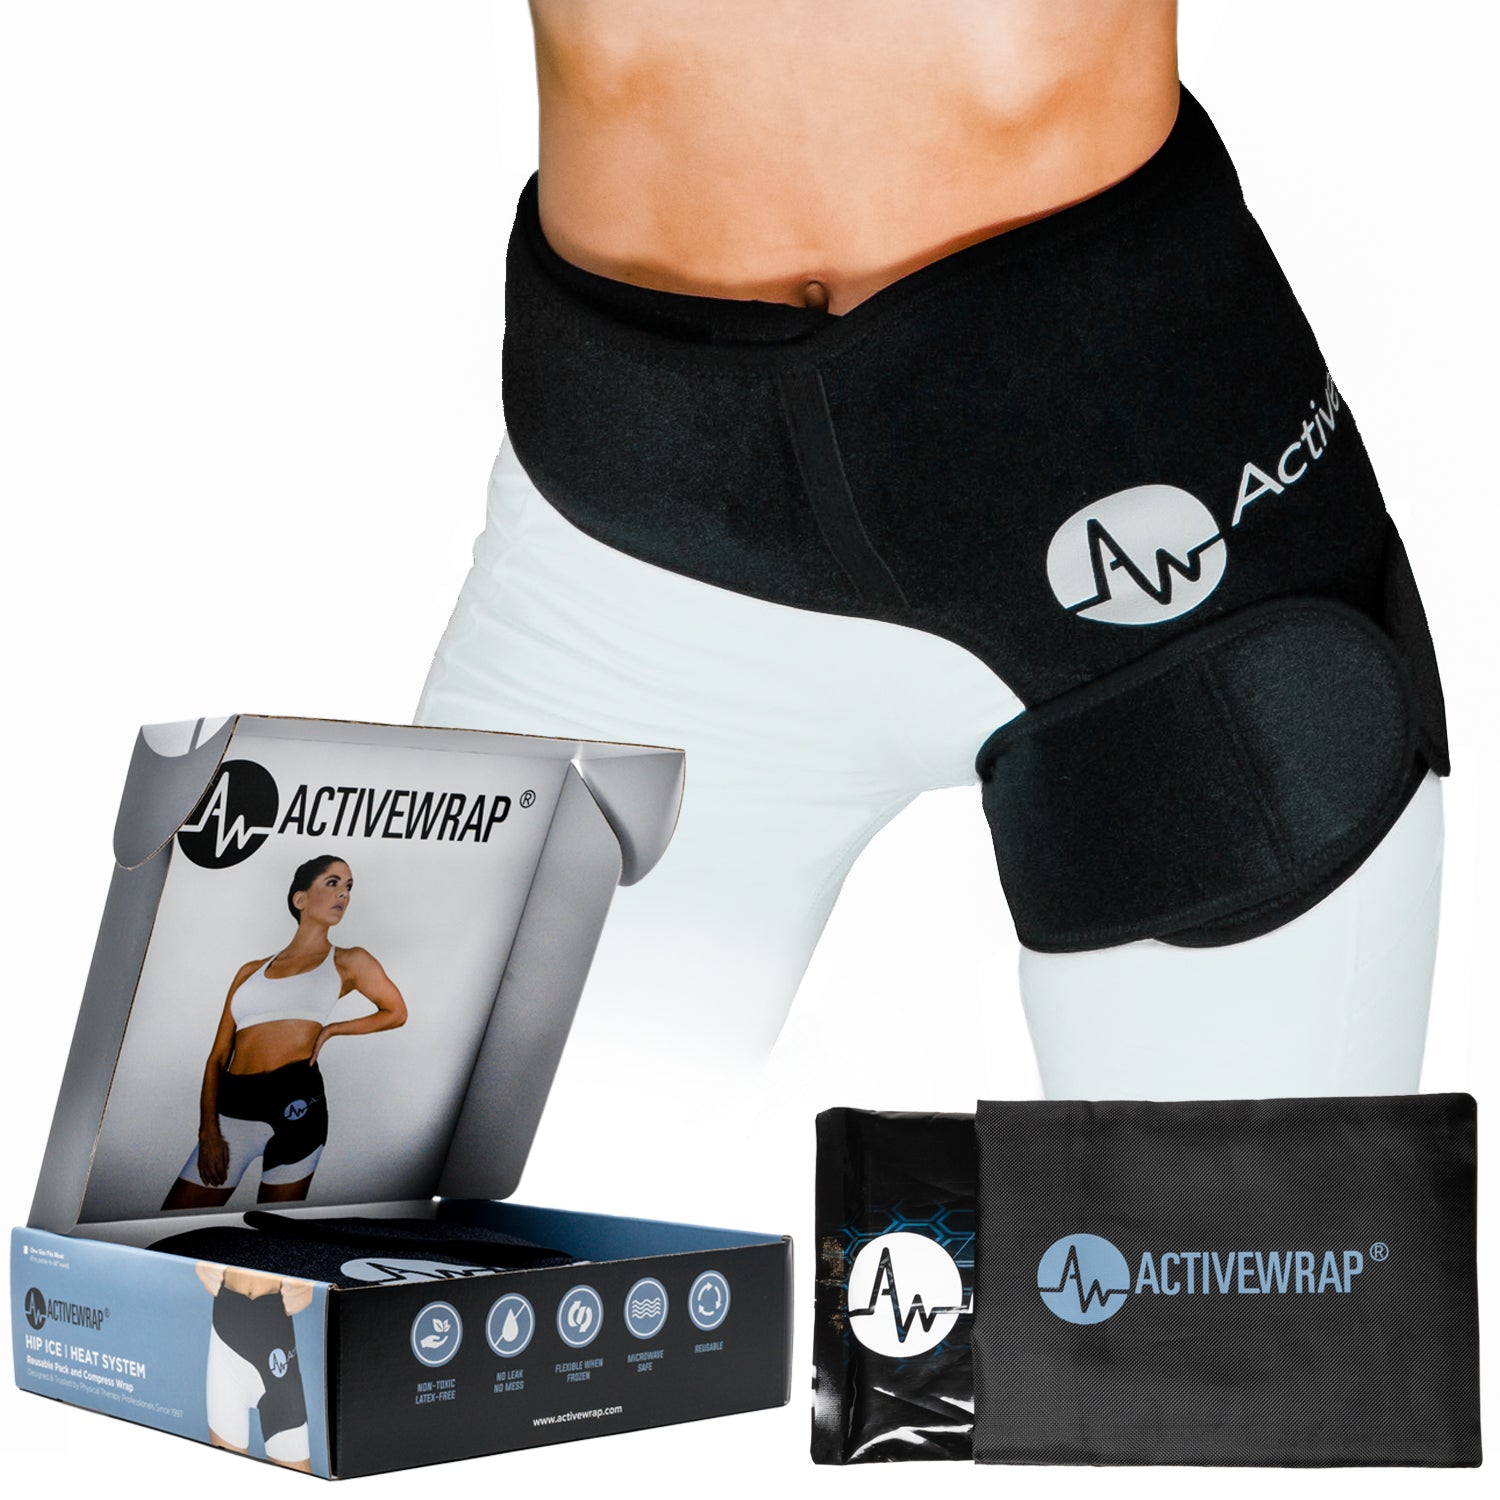 ice wrap for hip pain, ice machine for hip surgery, hip ice pack, hip ice wrap